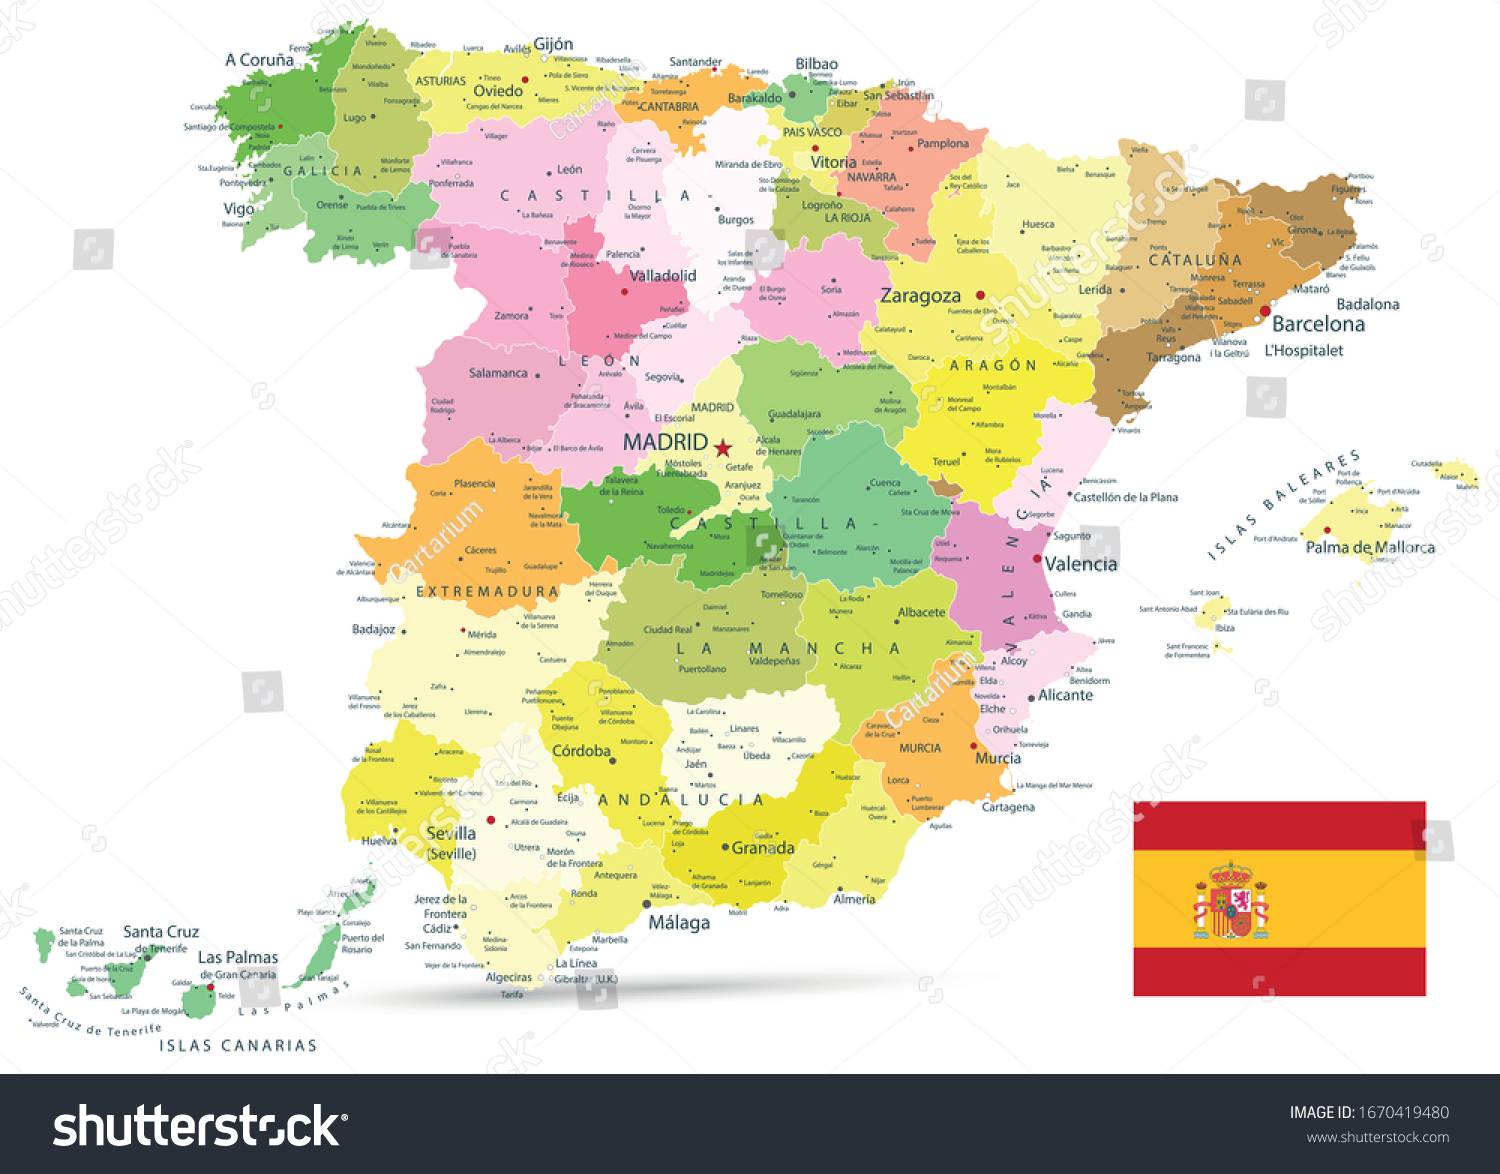 Administrative Political Map of Spain Isolated On White. All elements are separated in editable layers clearly labeled. Vector illustration. #1670419480